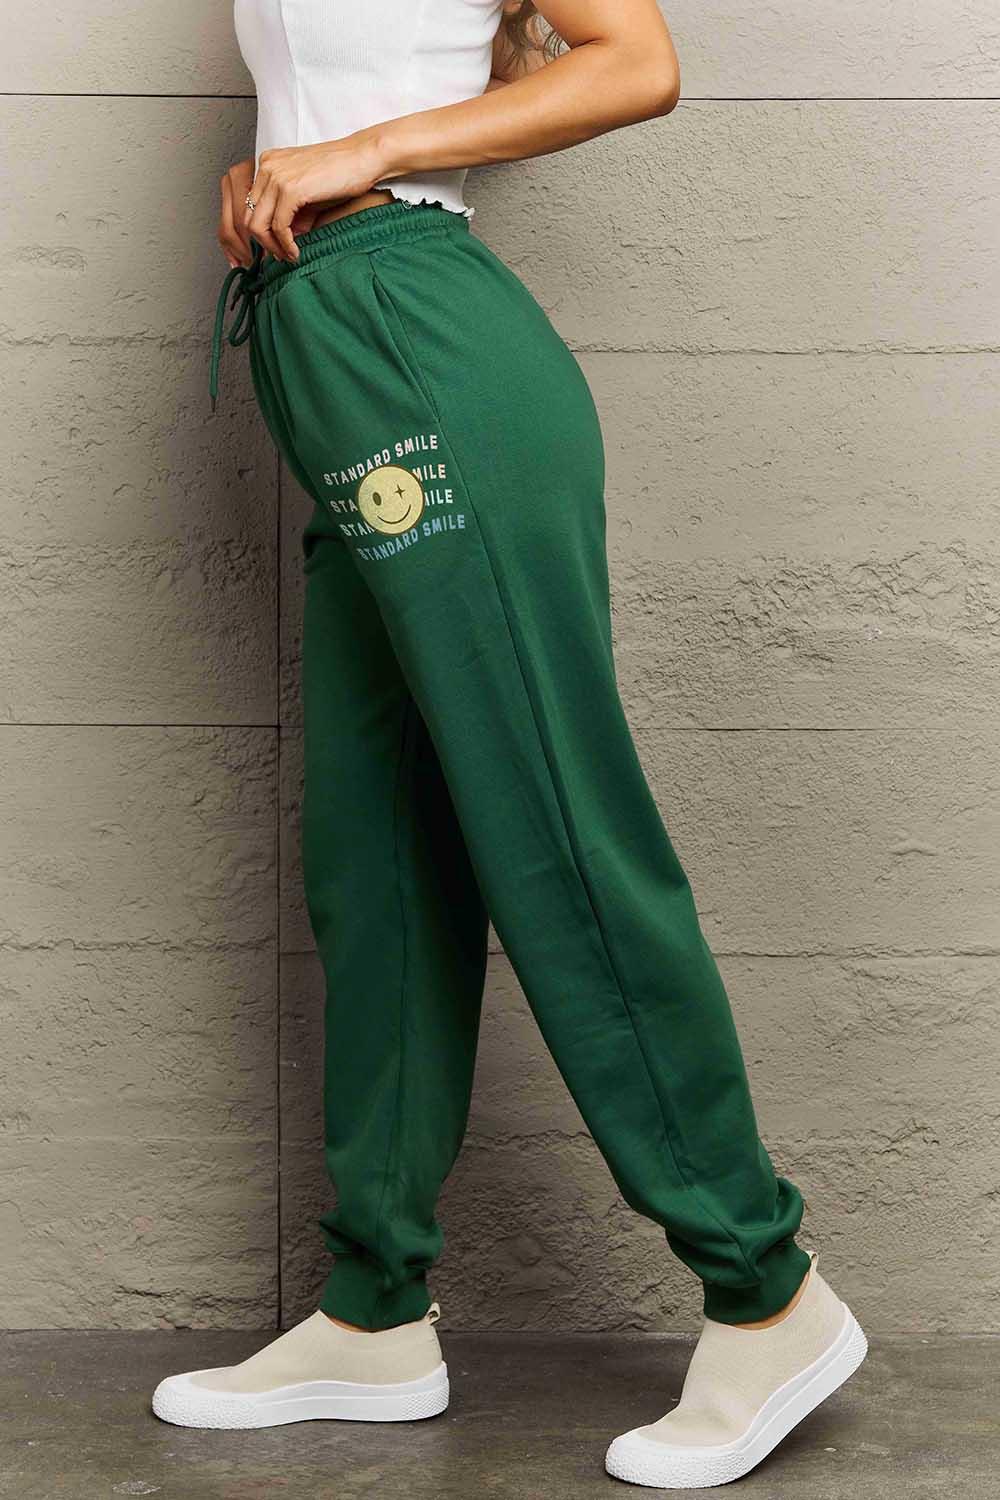 Simply Love Full Size STANDARD SMILES Graphic Sweatpants - Lab Fashion, Home & Health